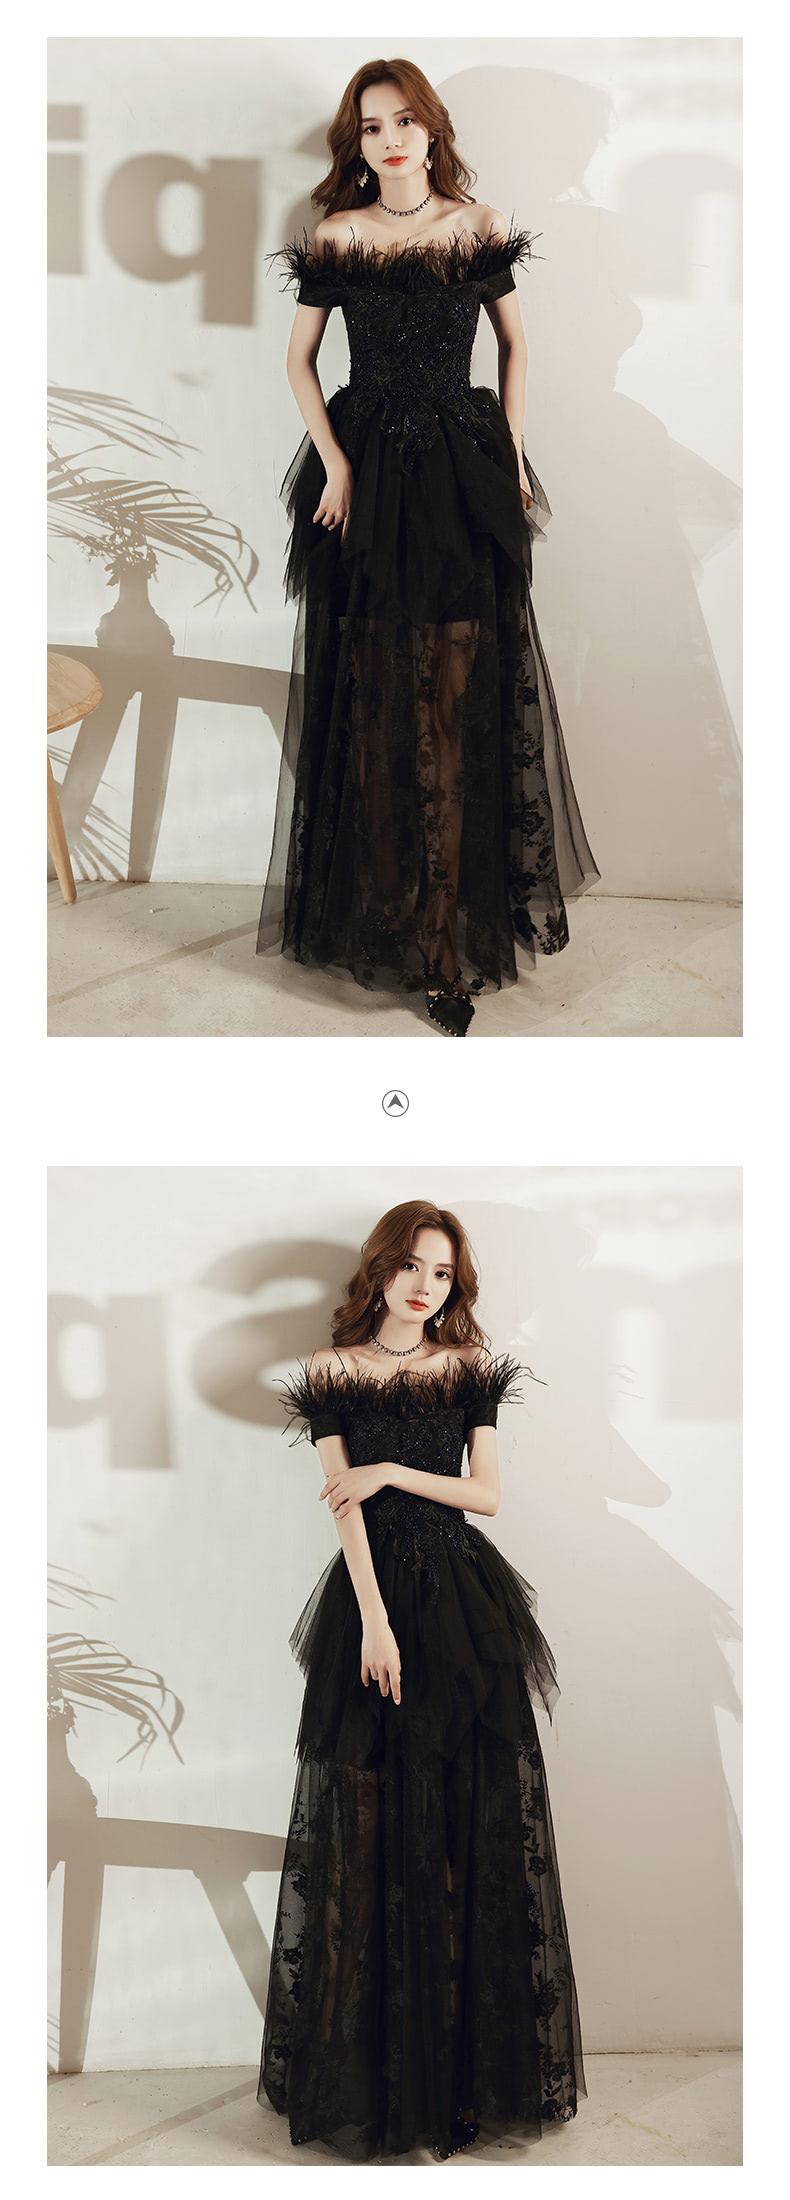 Luxury-Black-Feather-Cocktail-Prom-Dress-Evening-Party-Long-Gown12.jpg